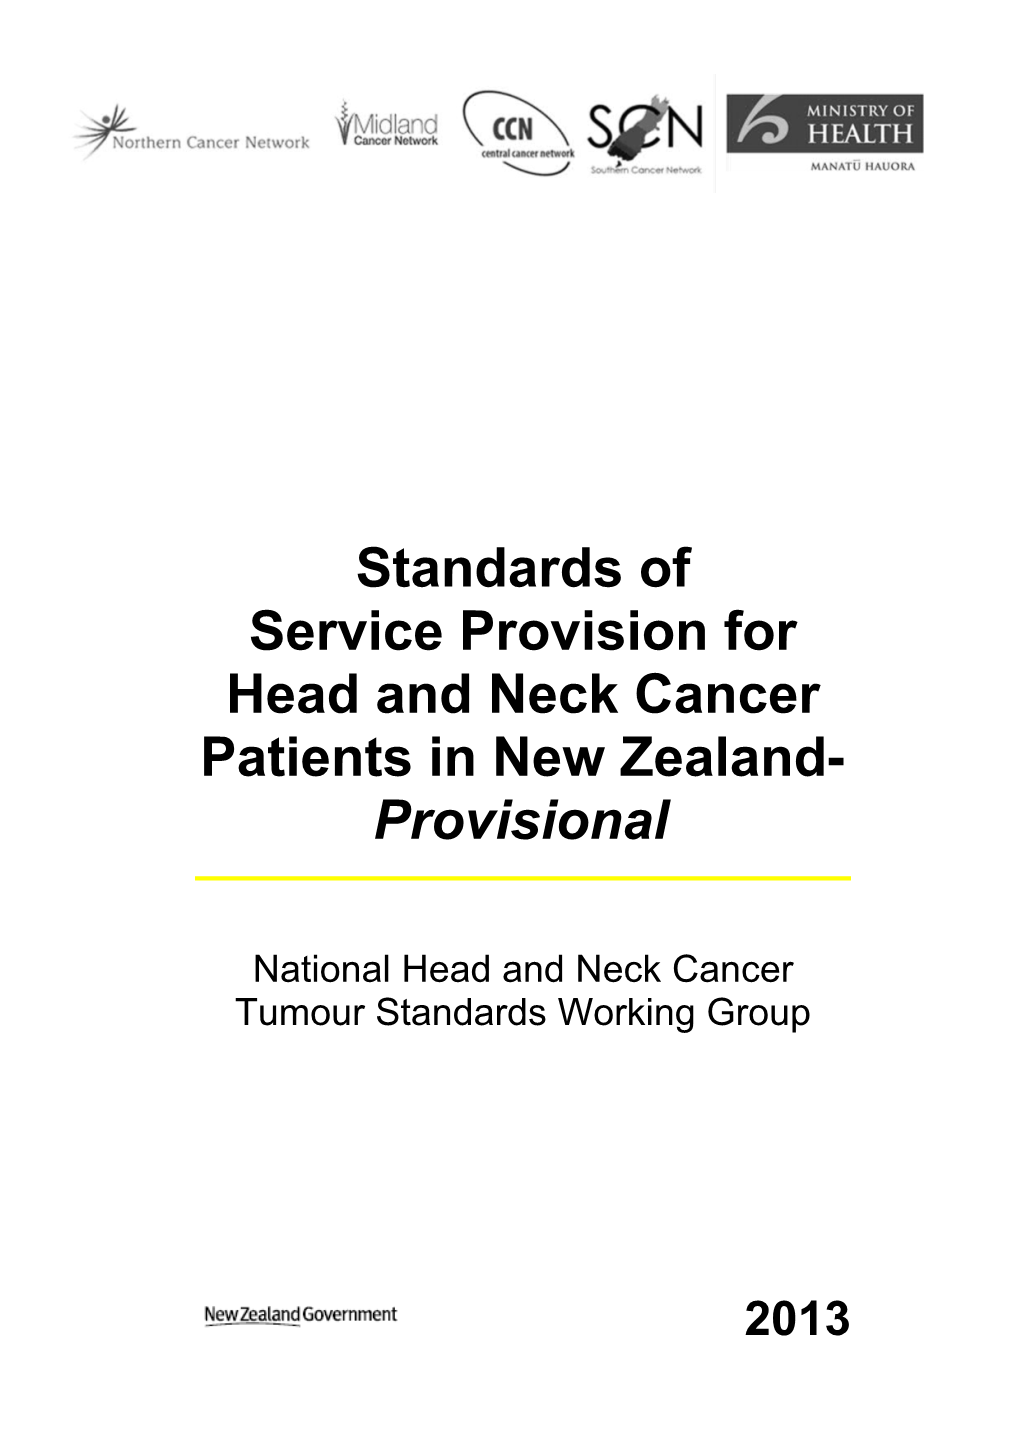 Standards of Service Provision for Head and Neck Cancer Patients in New Zealand- Provisional